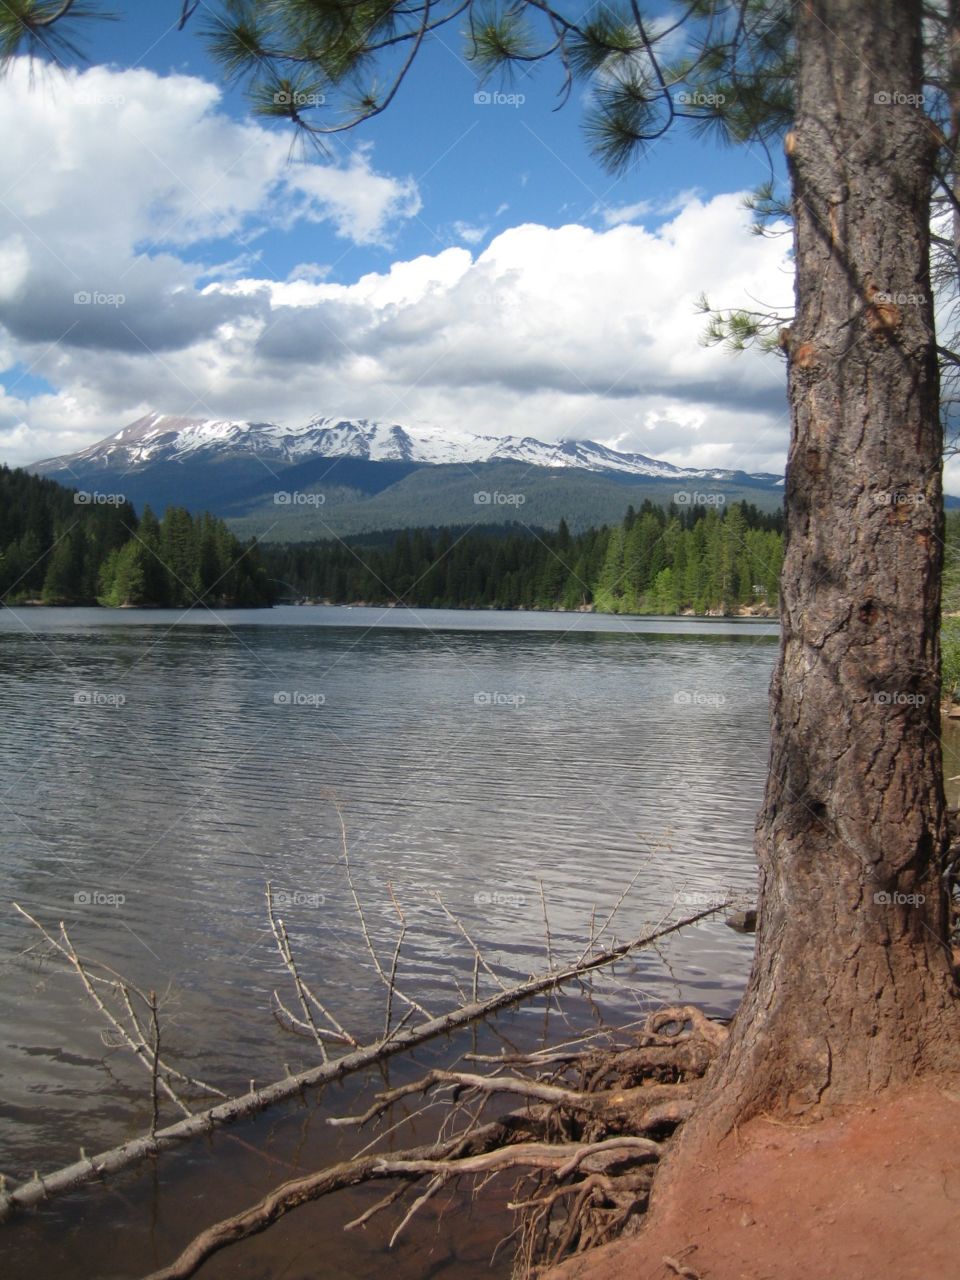 Lake Forested Glacier Mountain. Lake surrounded by pine trees. Backdrop of a volcanic mountain with glacier.